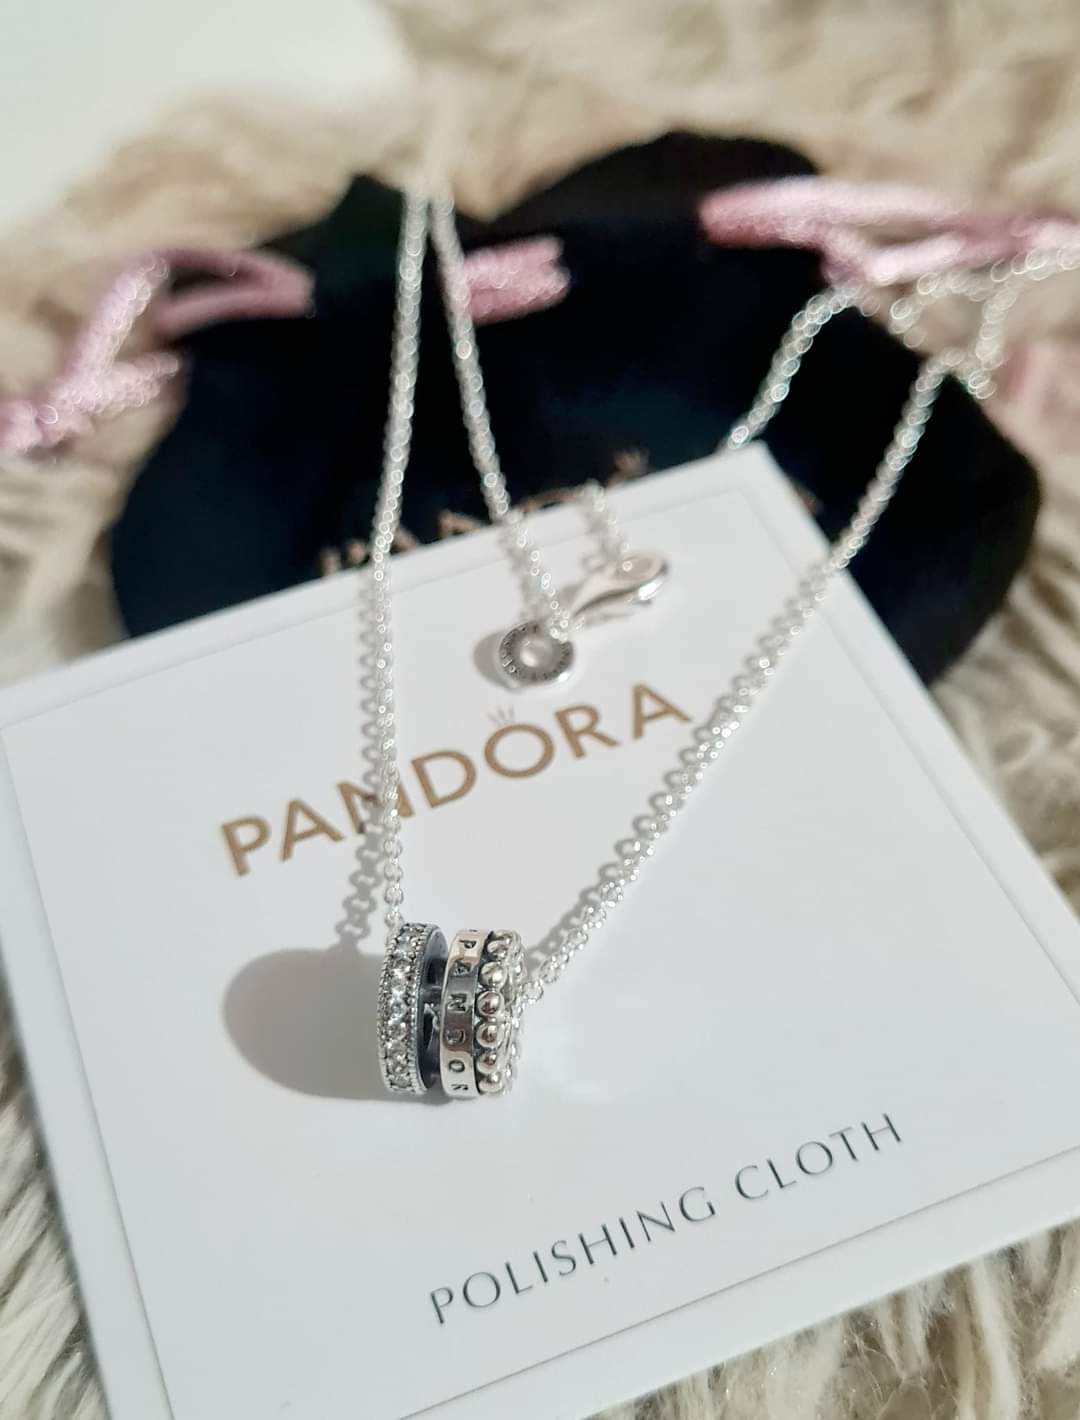 Pandora Silver Chain 45 Cm Necklace 925 Silver Vintage Women's Gift Necklace  Retro Timeless Eye-catcher Chain Snake Chain With Pendant - Etsy UK